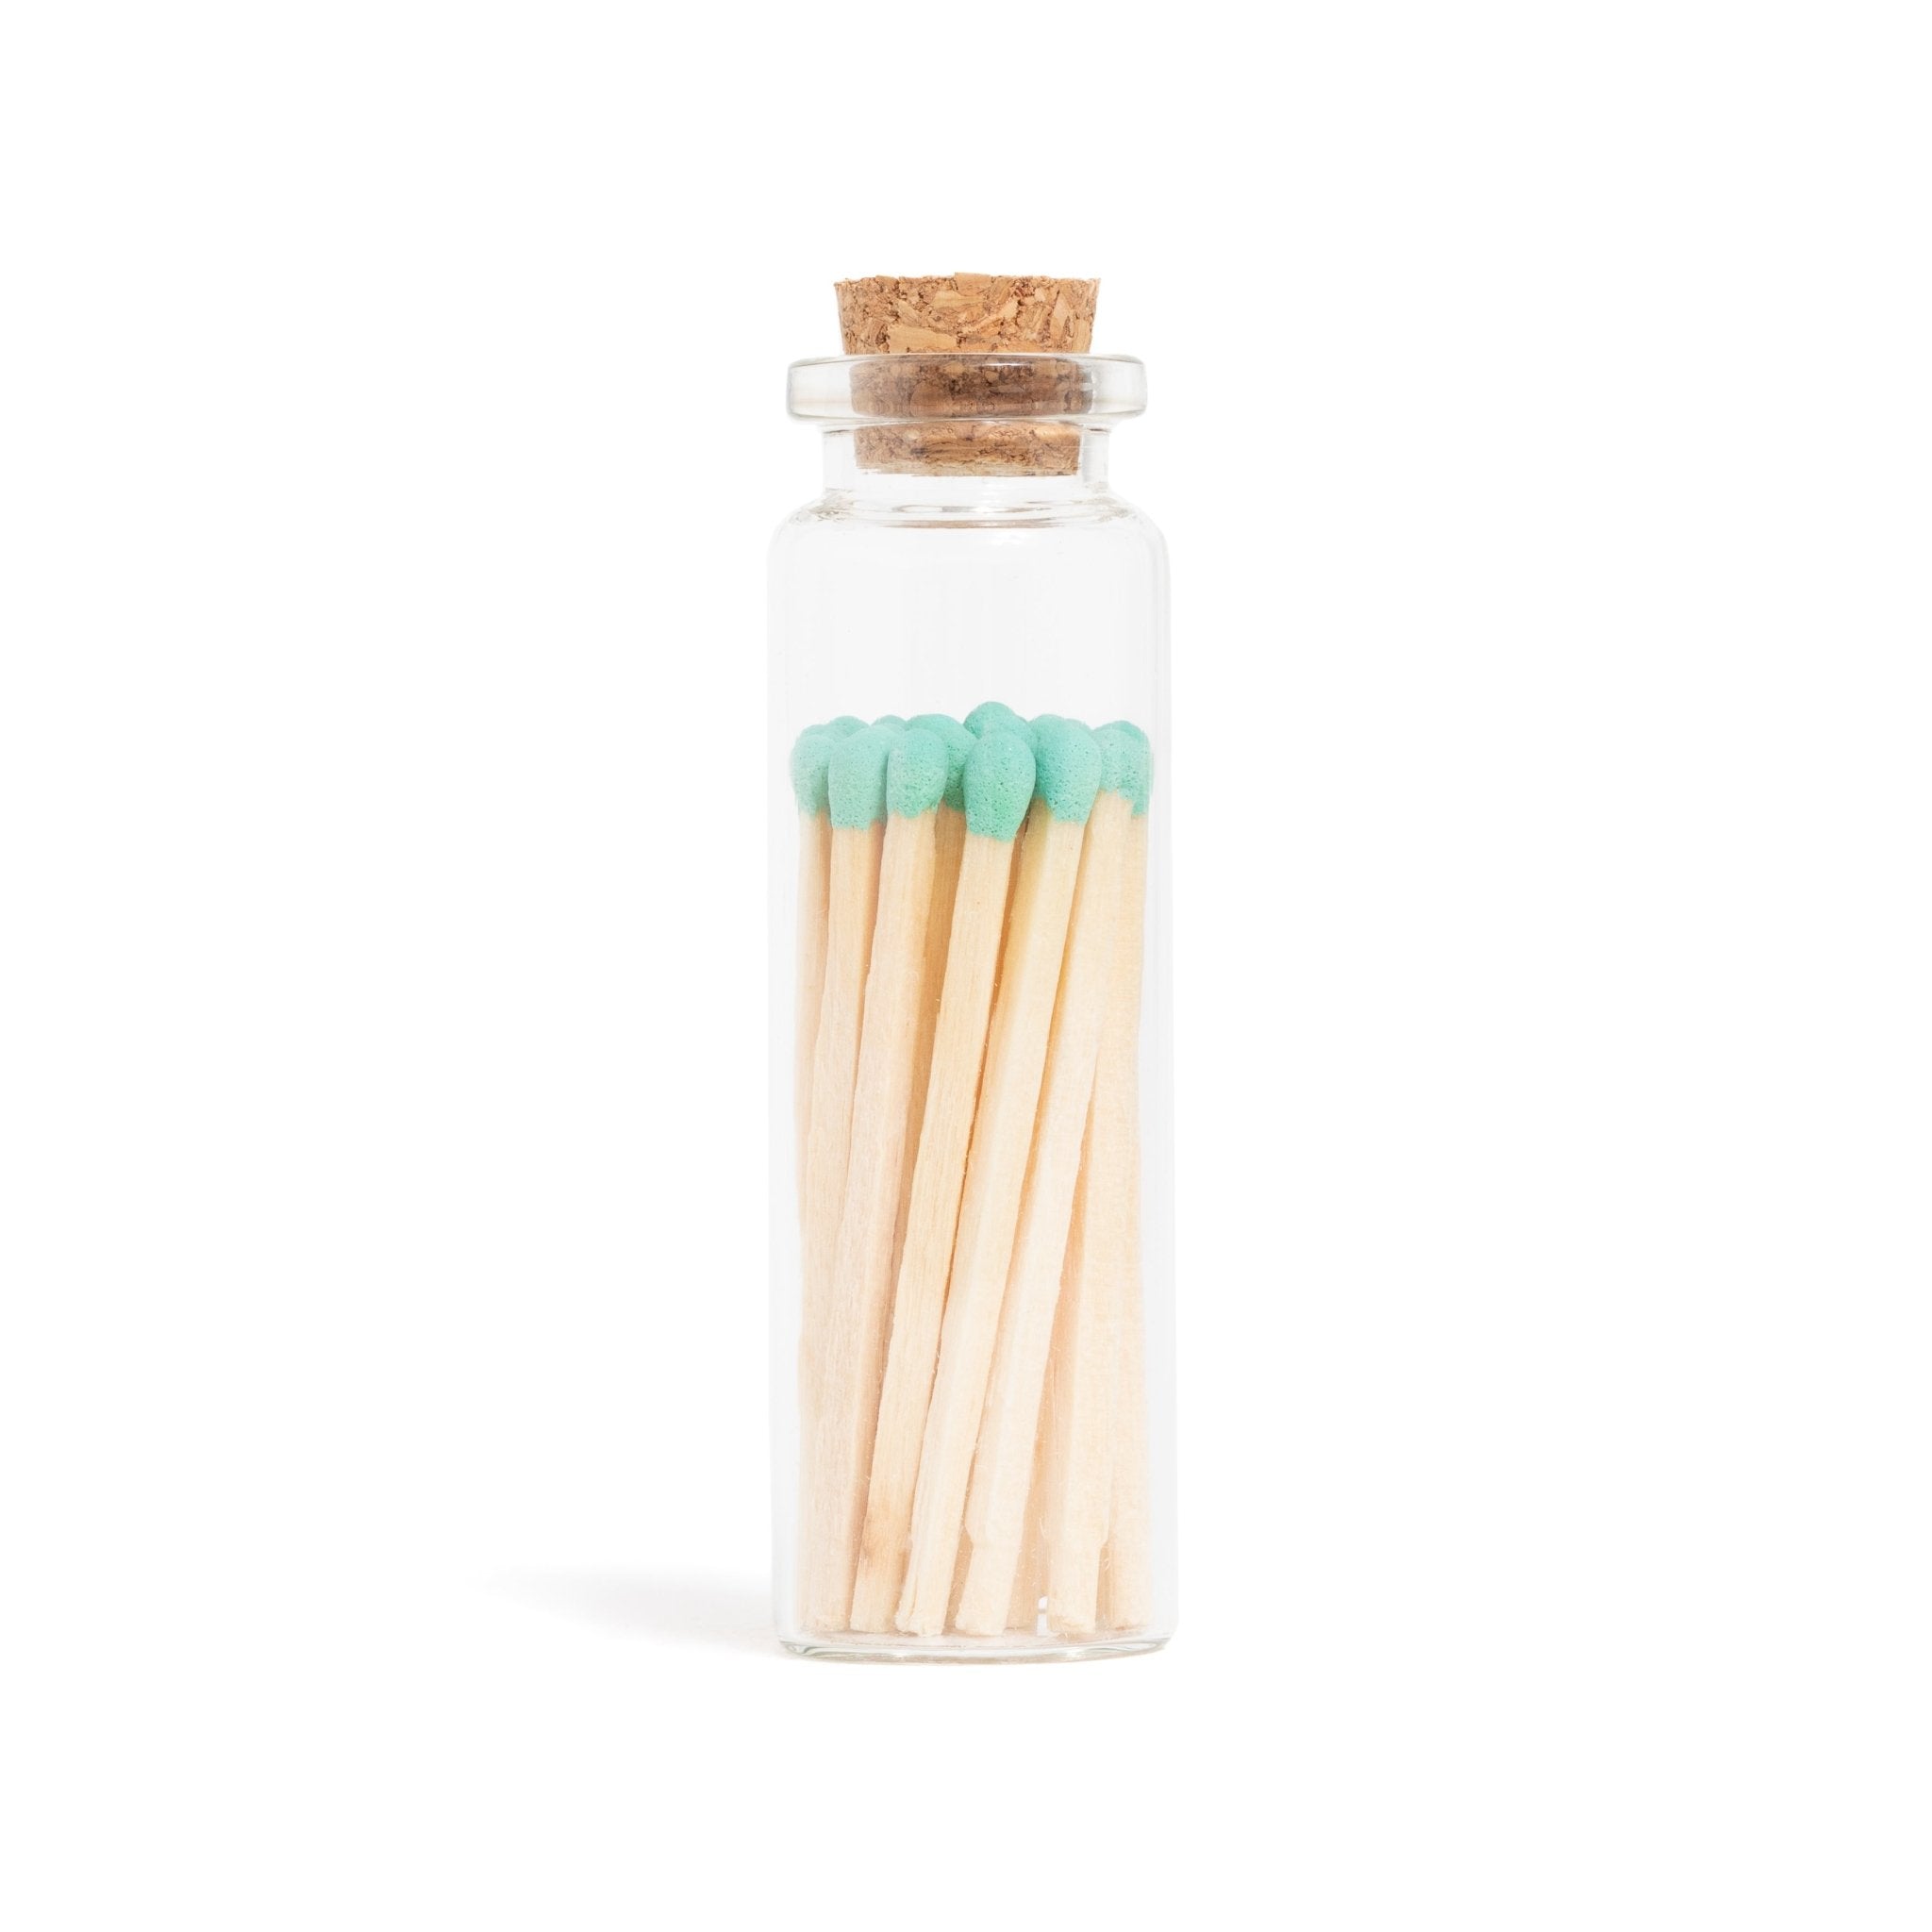 Matchstick Jar With Colorful Matches Strike on Bottle Glass Vial 20 Colored  Matches 